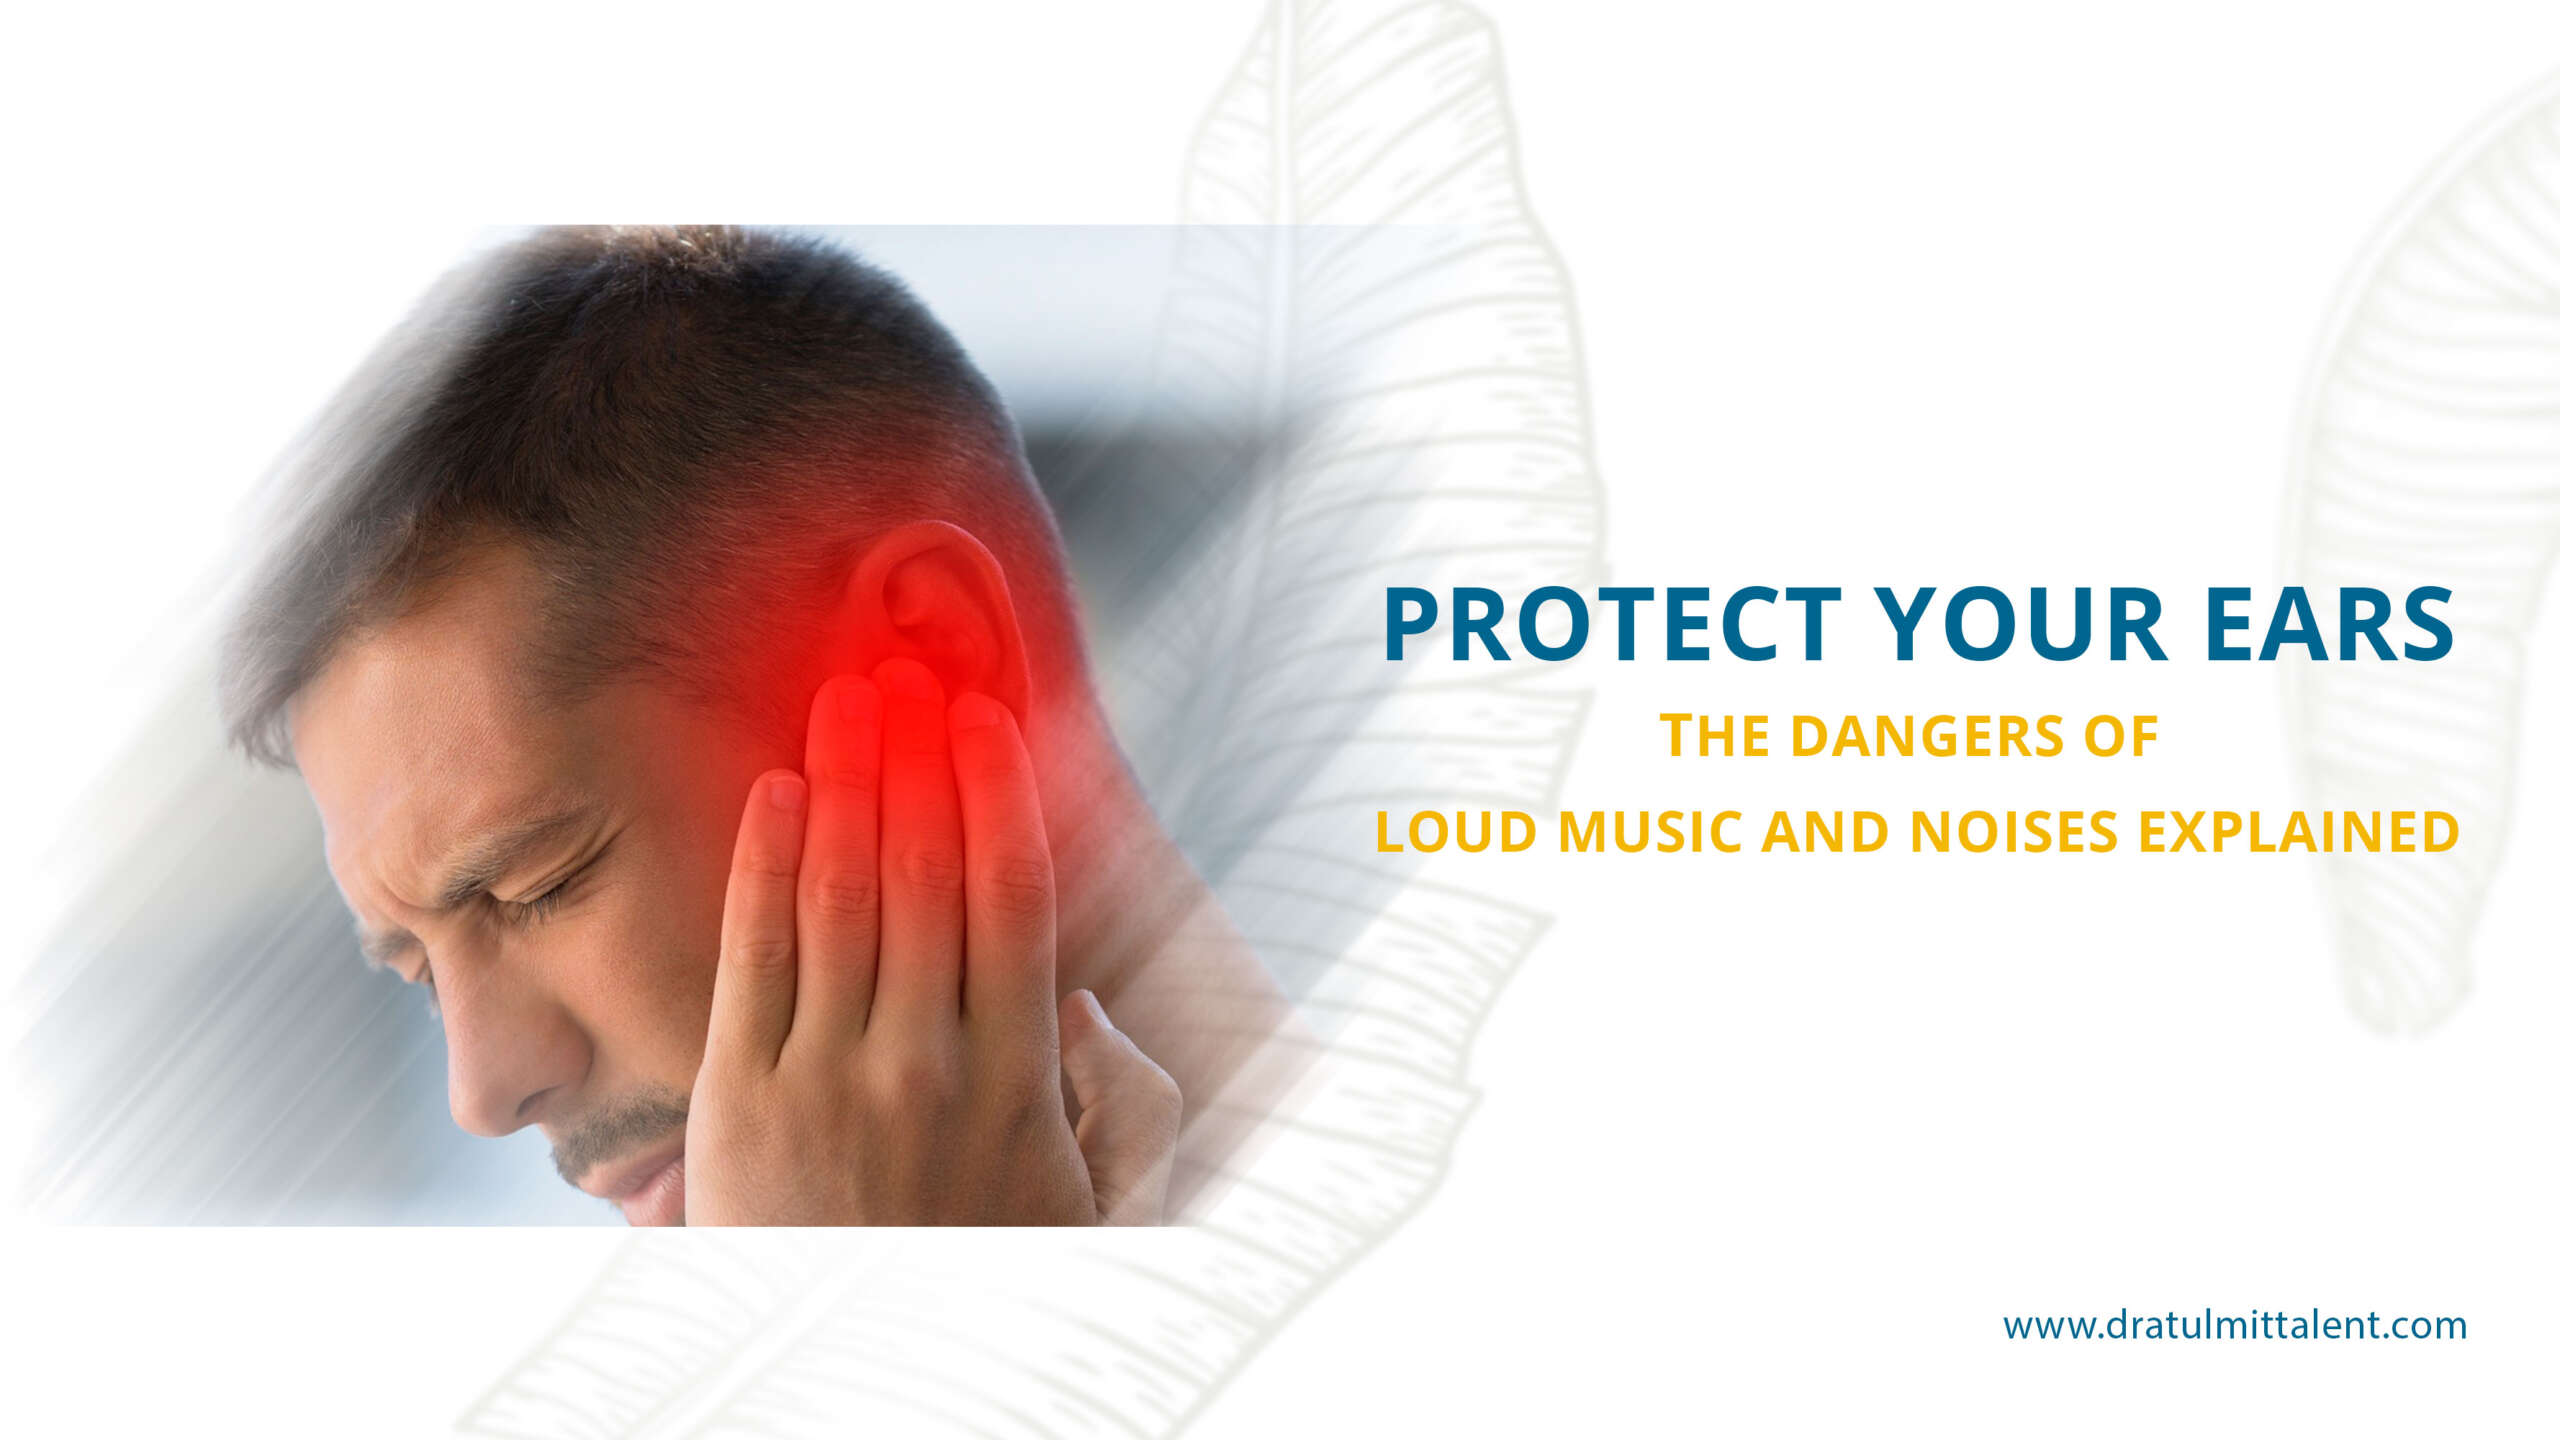 Protect Your Ears: The Dangers of Loud Music and Noises Explained